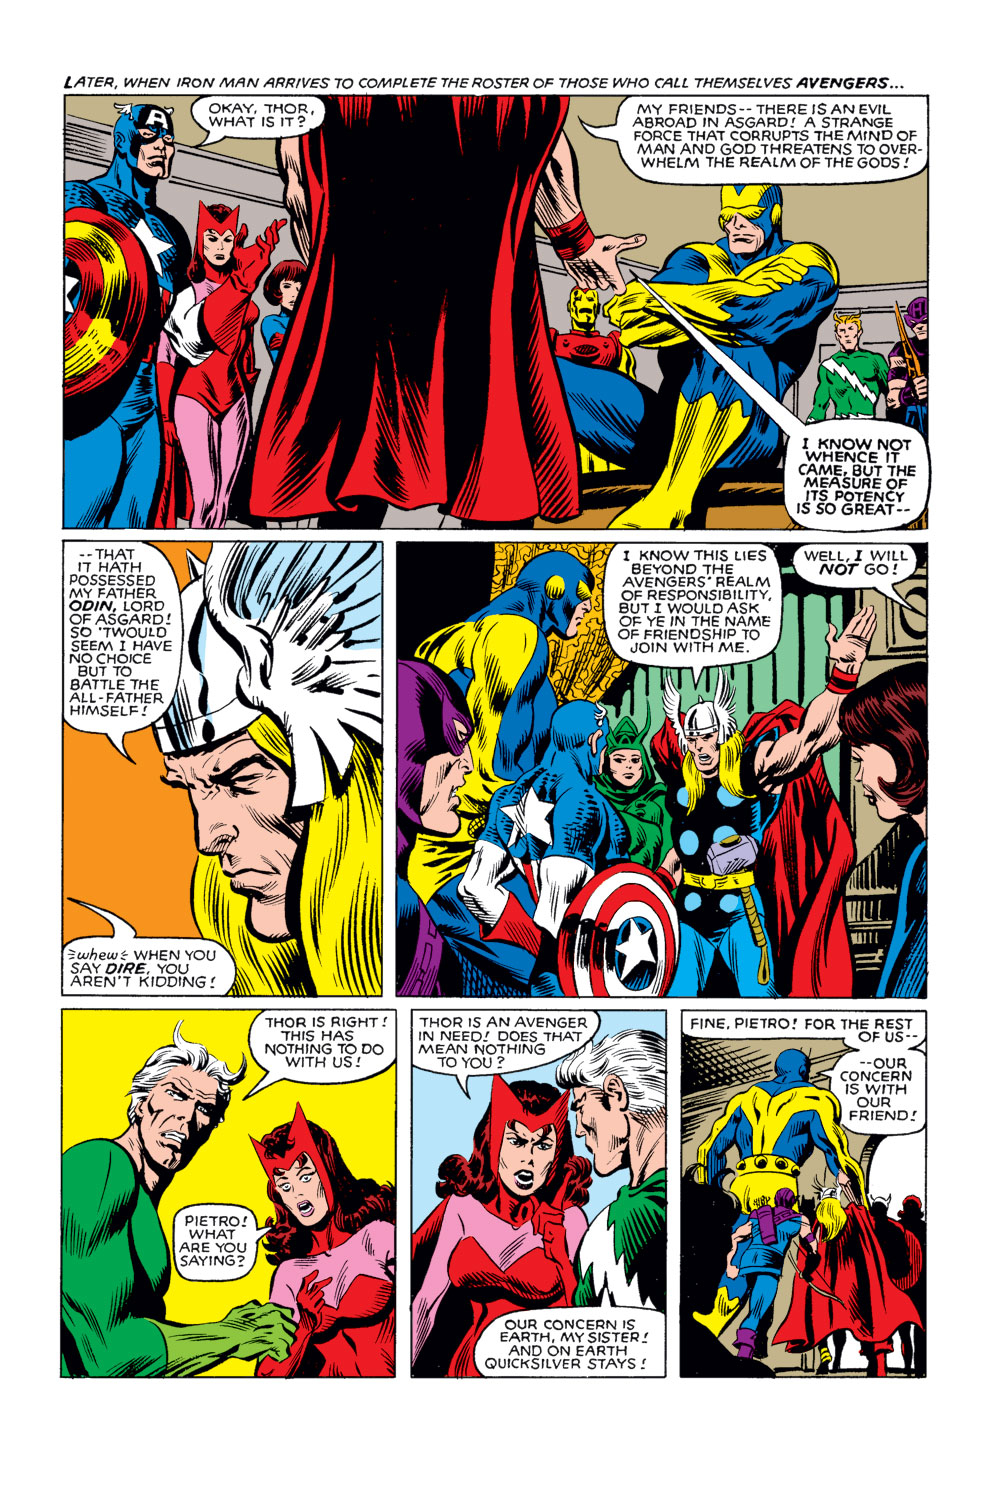 What If? (1977) issue 25 - Thor and the Avengers battled the gods - Page 7